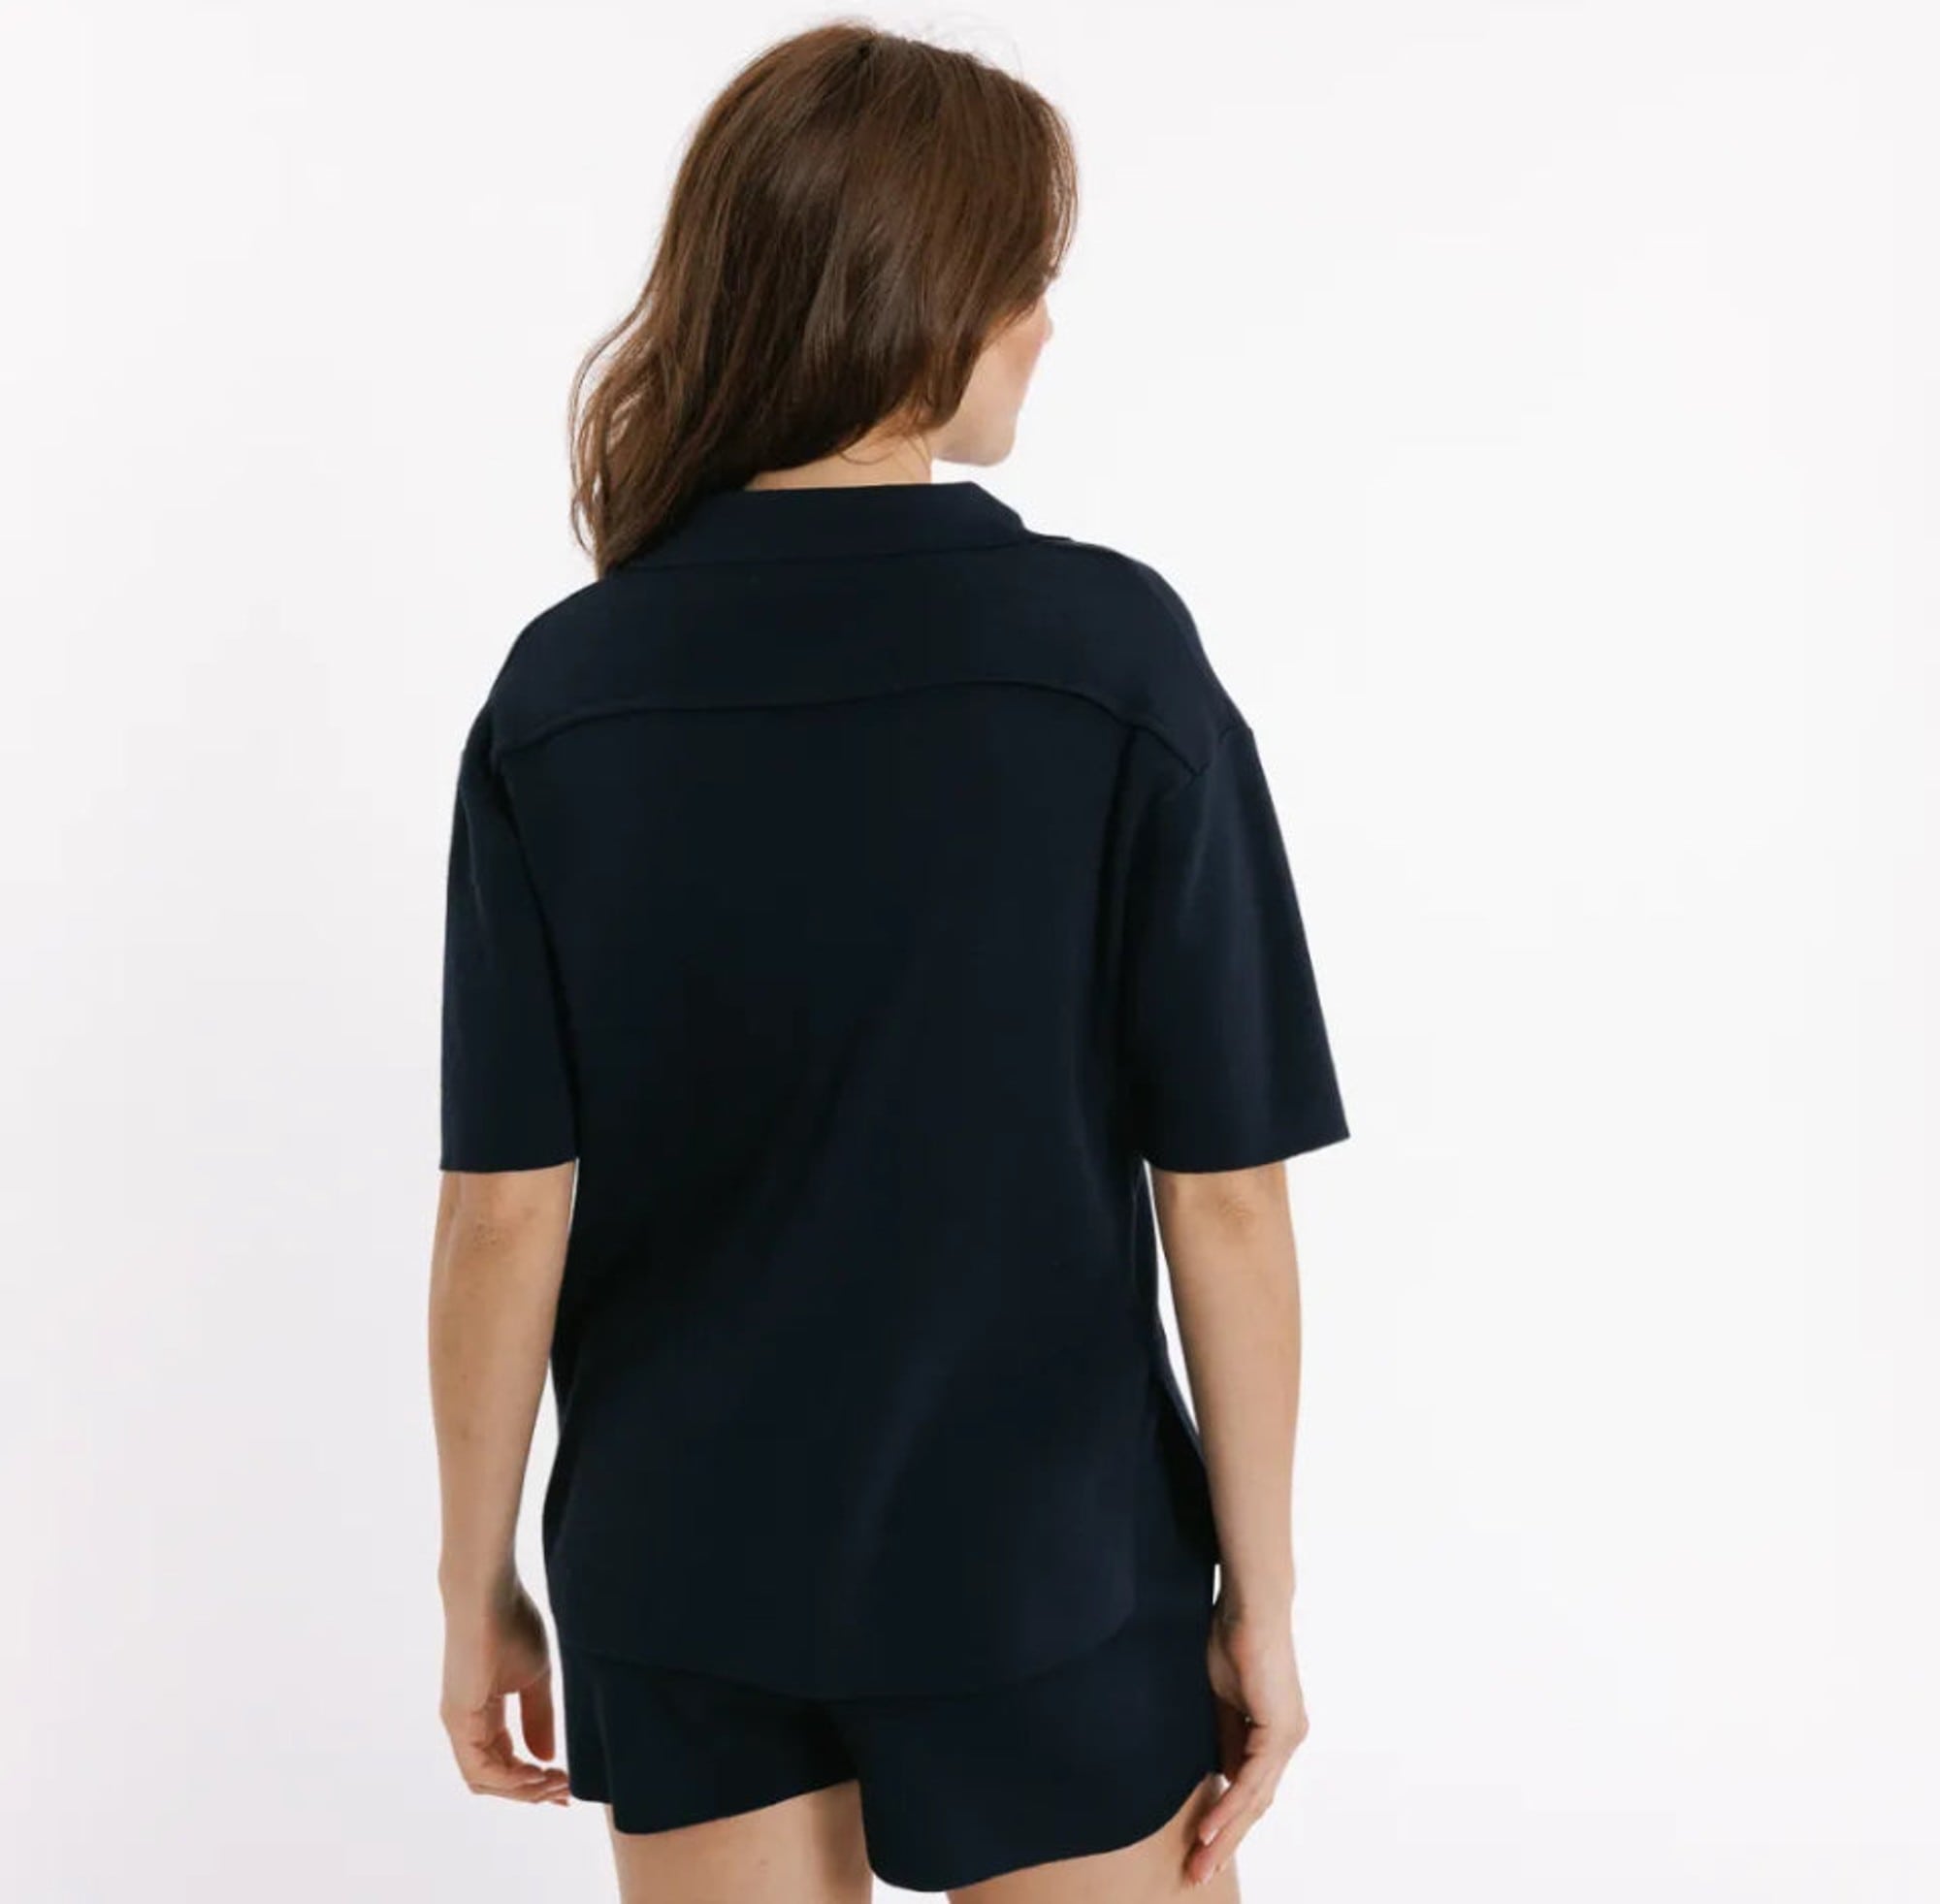 Sweewe Cou Cou Cardigan in Navy